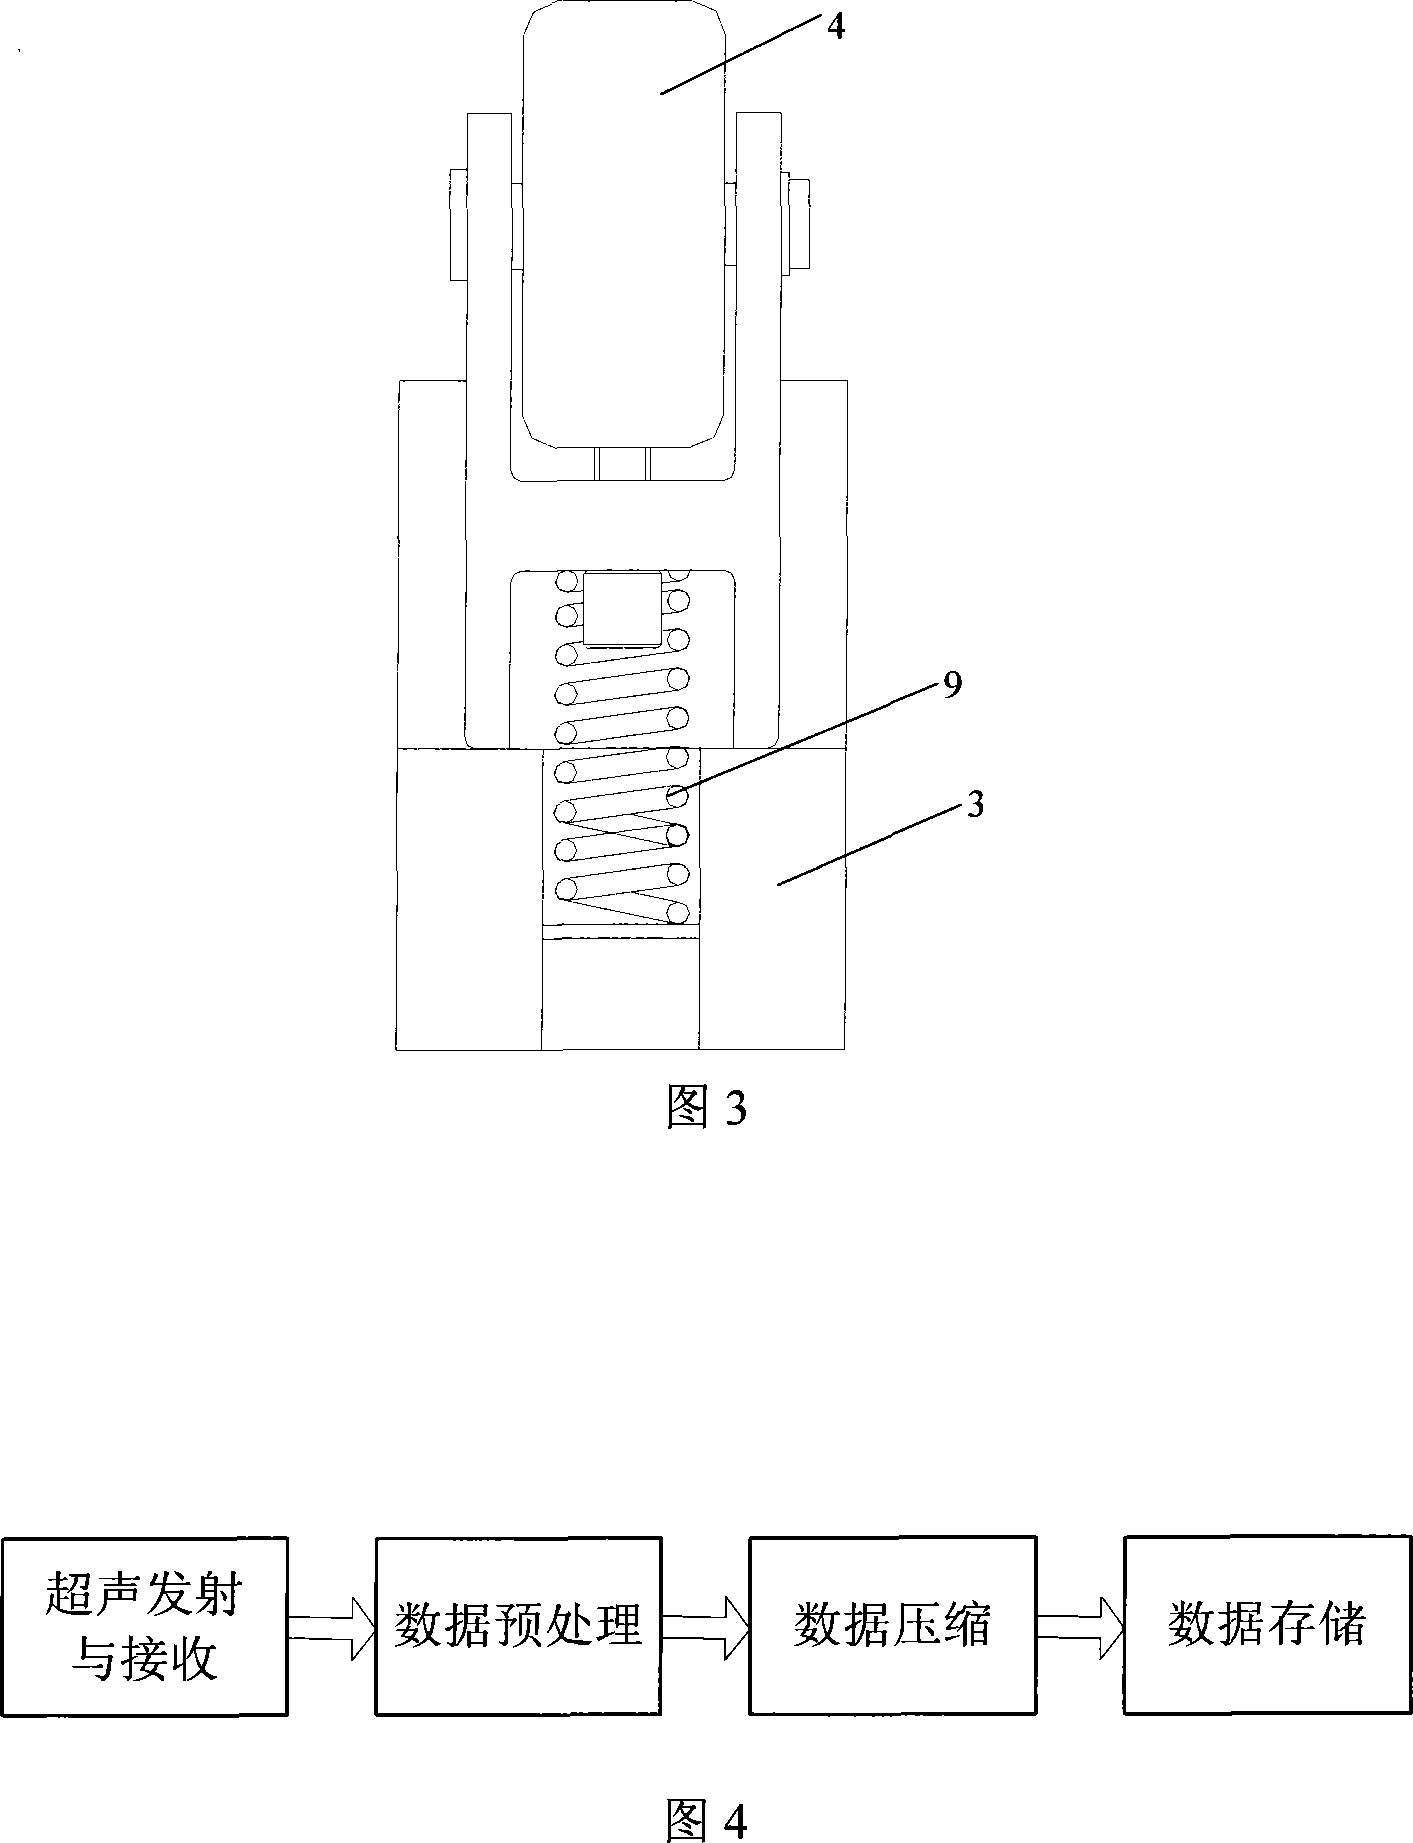 Pipe data collection and memory detecting device